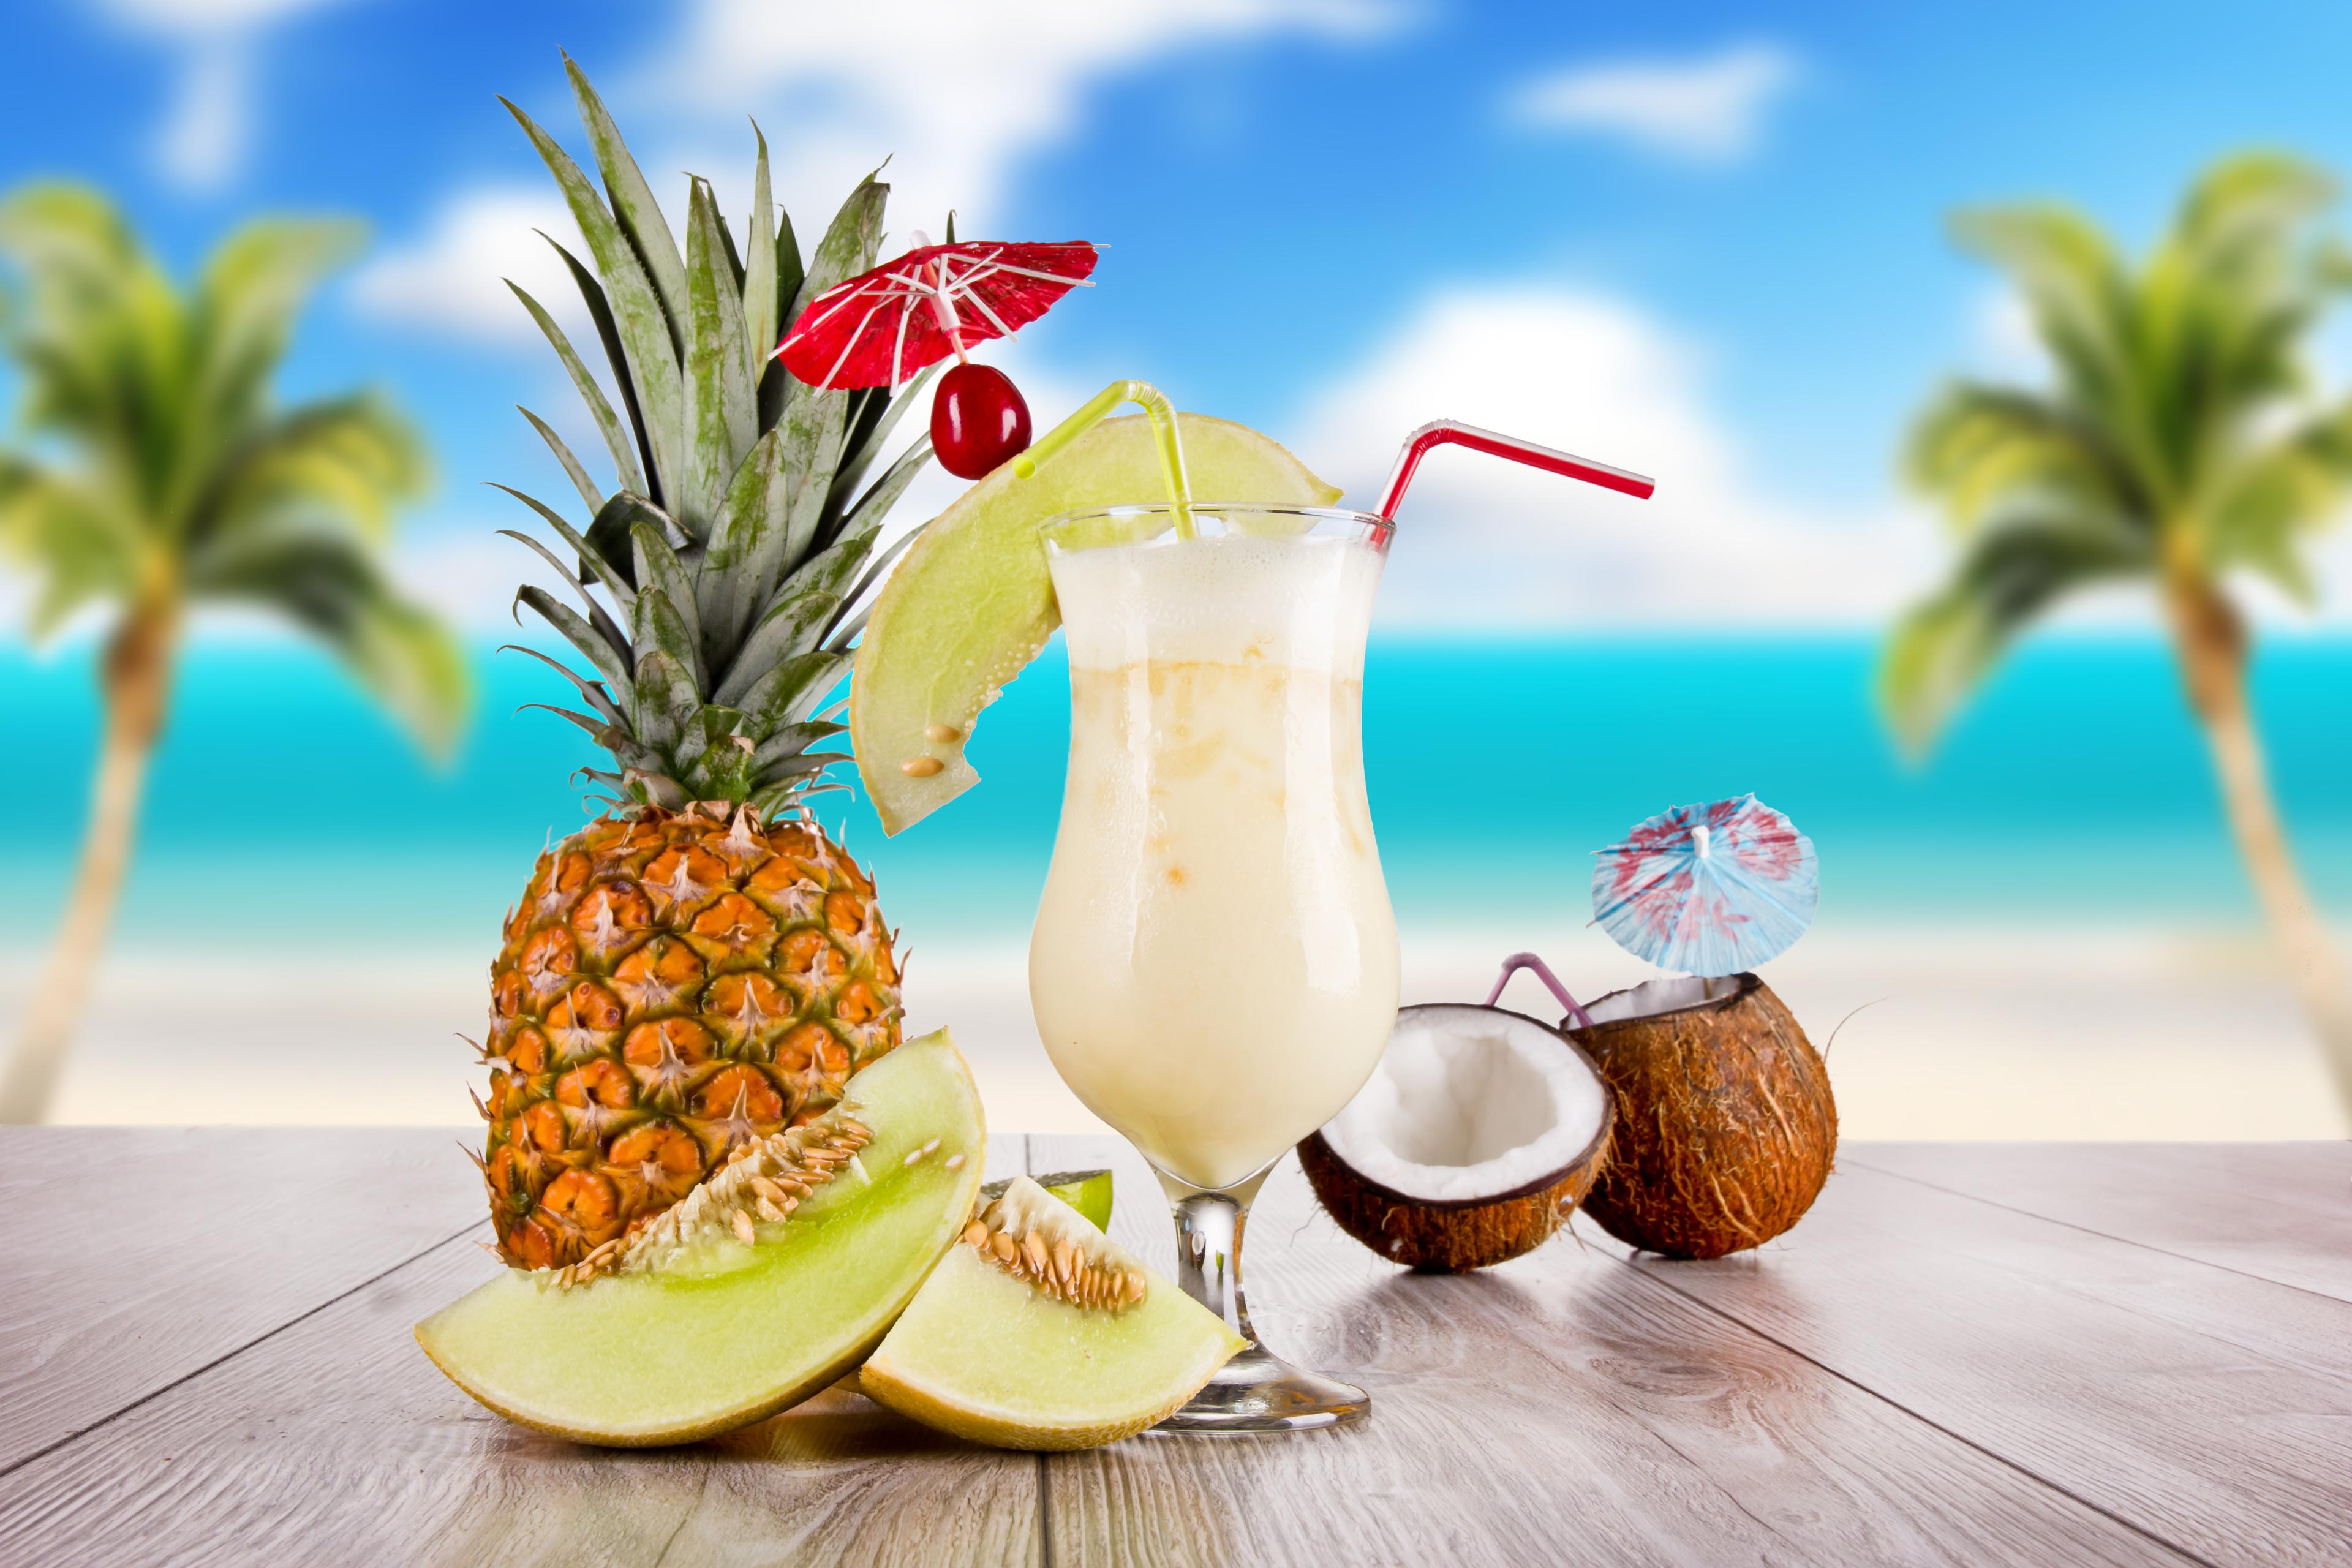 summer-food-cocktail-cocktail-glass-coconut-pineapple-table-sky-clouds-palm-trees-sea